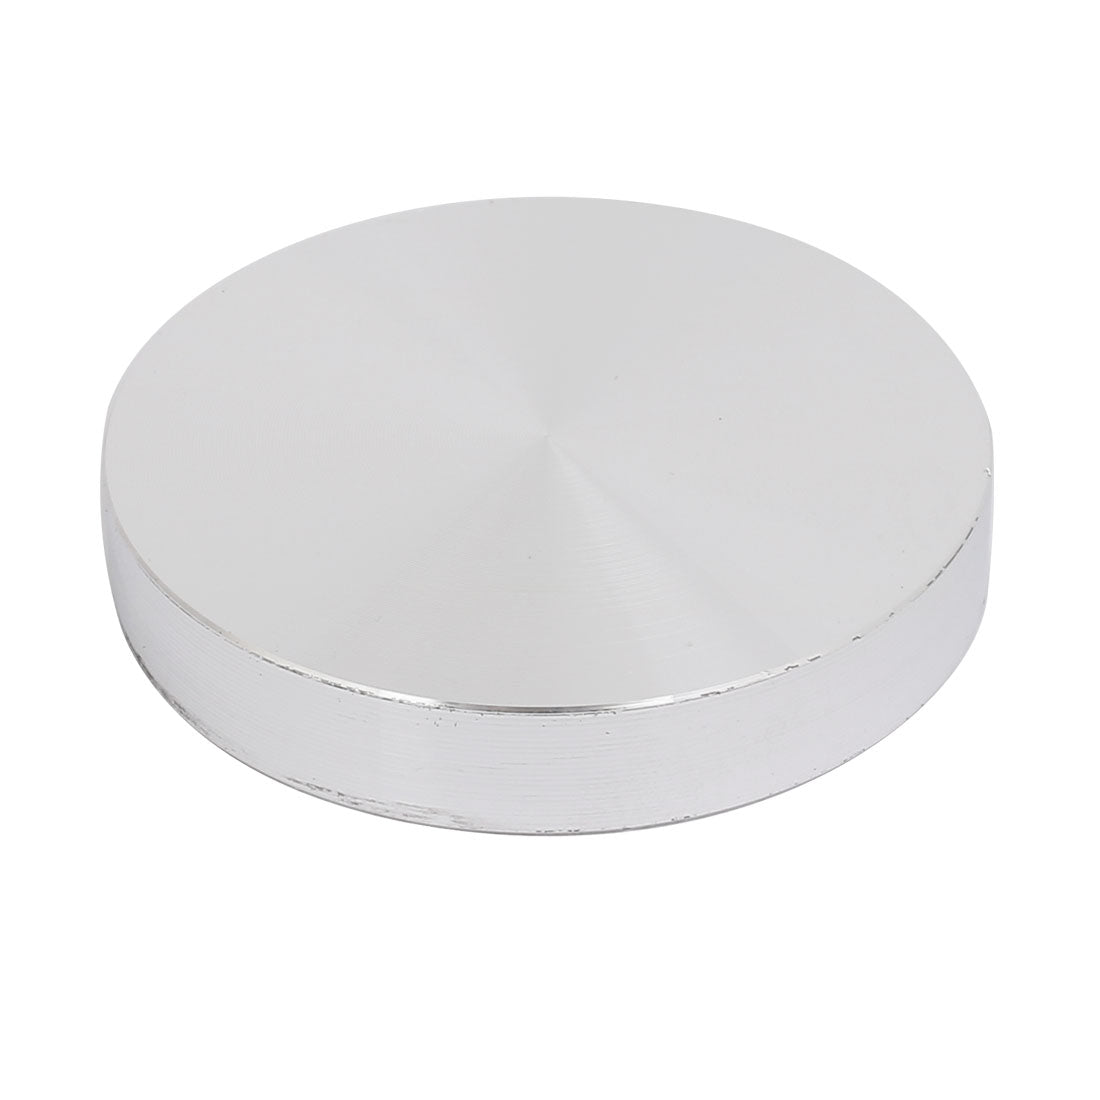 uxcell Uxcell 55mm Diameter 10mm Thickness M10 Thread Hollow Aluminum Disc Polished Finish